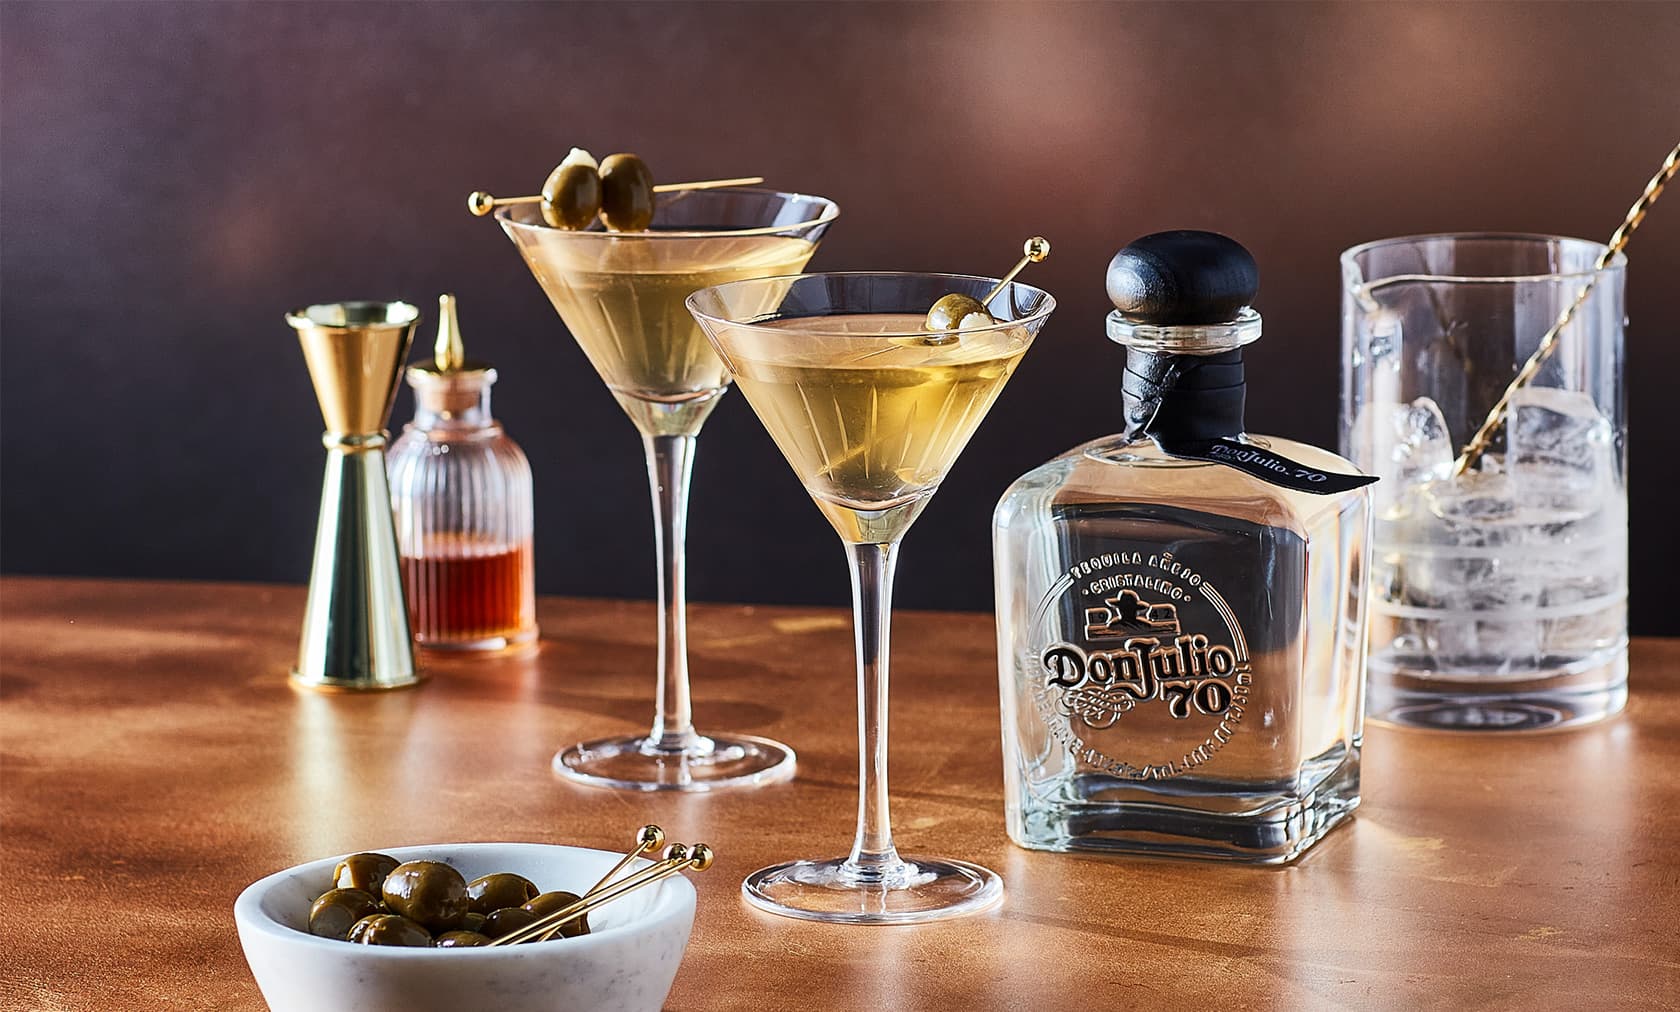 Director's Martini made with Don Julio 70 Cristalino Tequila